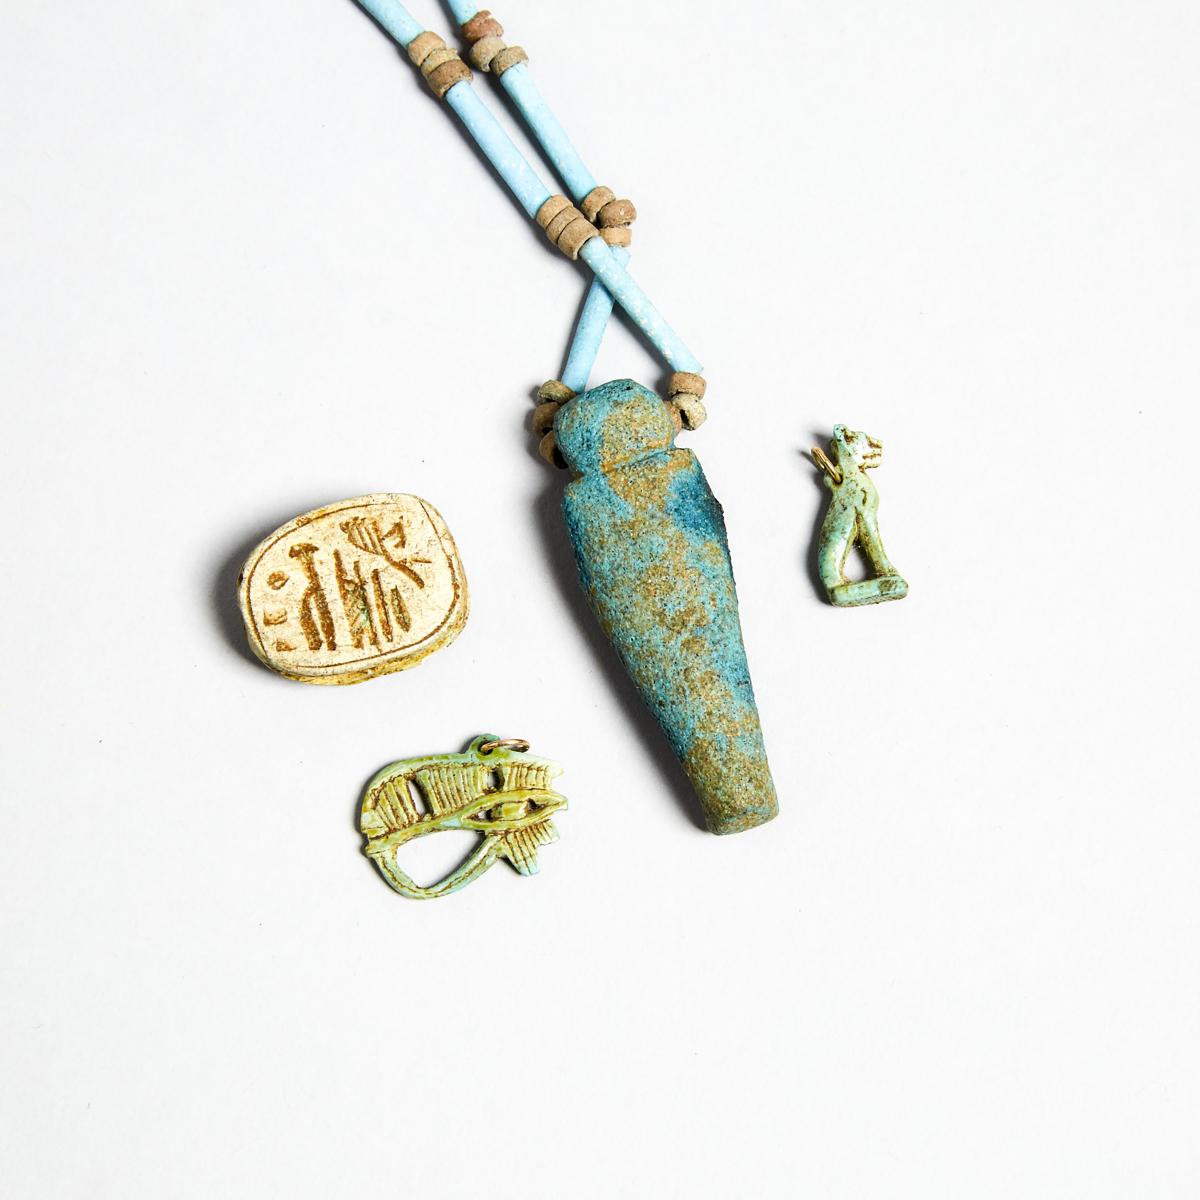 Group of Egyptian Turquoise Faience Amulets and Beads, New Kingdom to Late Period, 1550-332 B.C., sh - Image 3 of 3